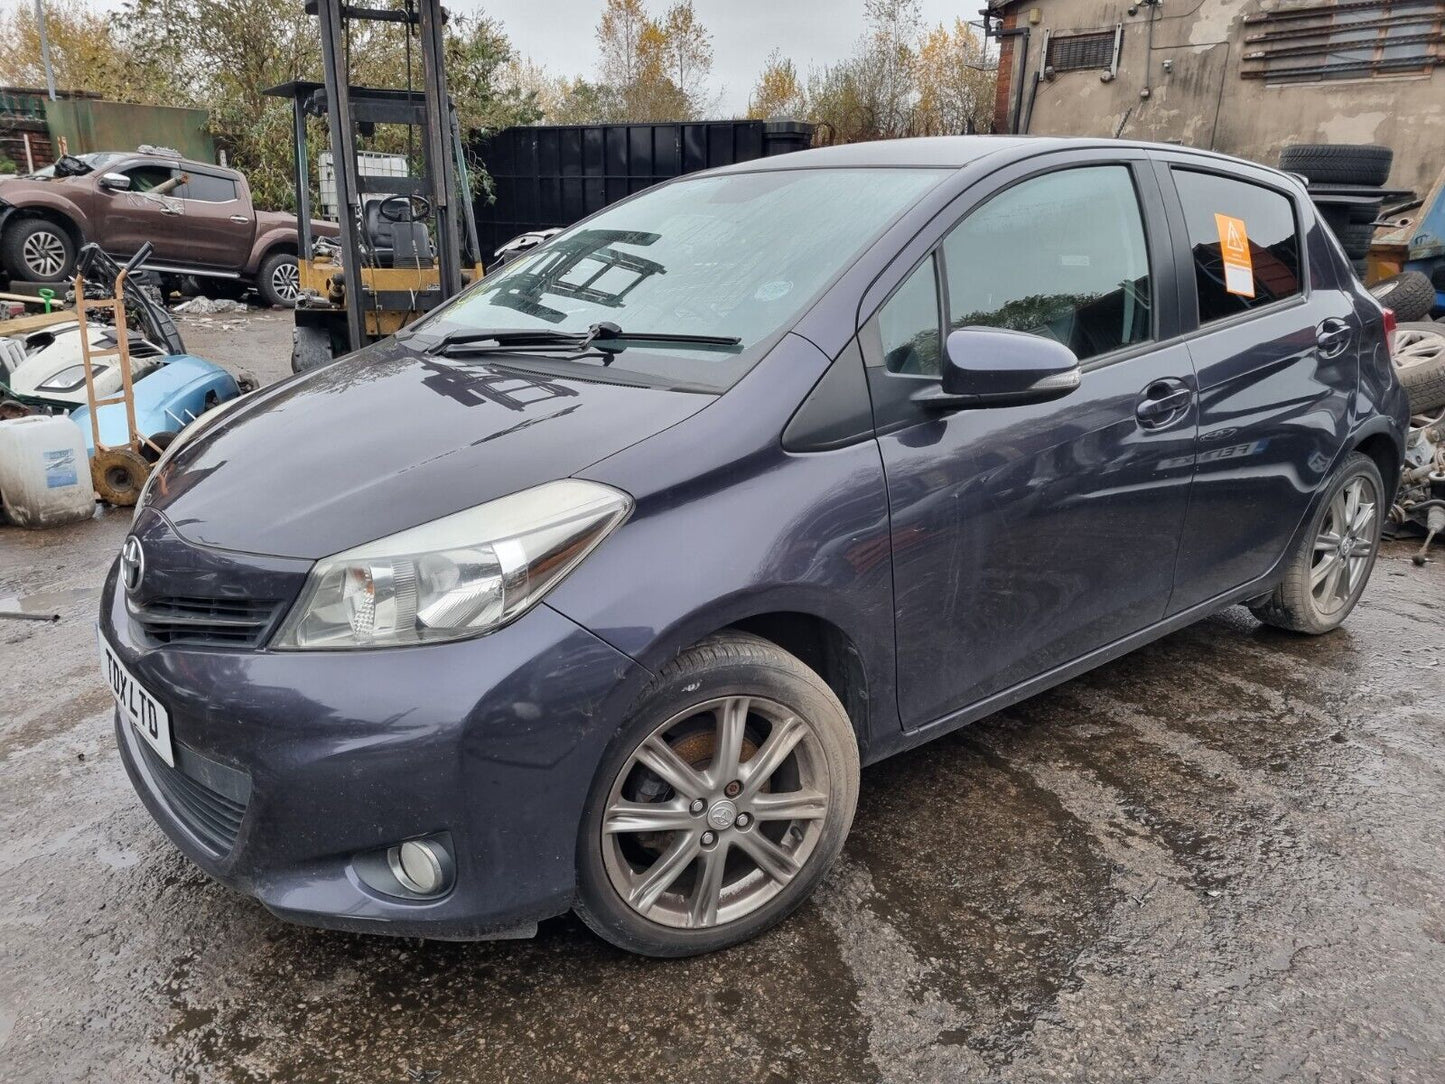 2012 TOYOTA YARIS MK3 SR (NSP130) 1.3 PETROL 6 SPEED MANUAL FOR PARTS & SPARES